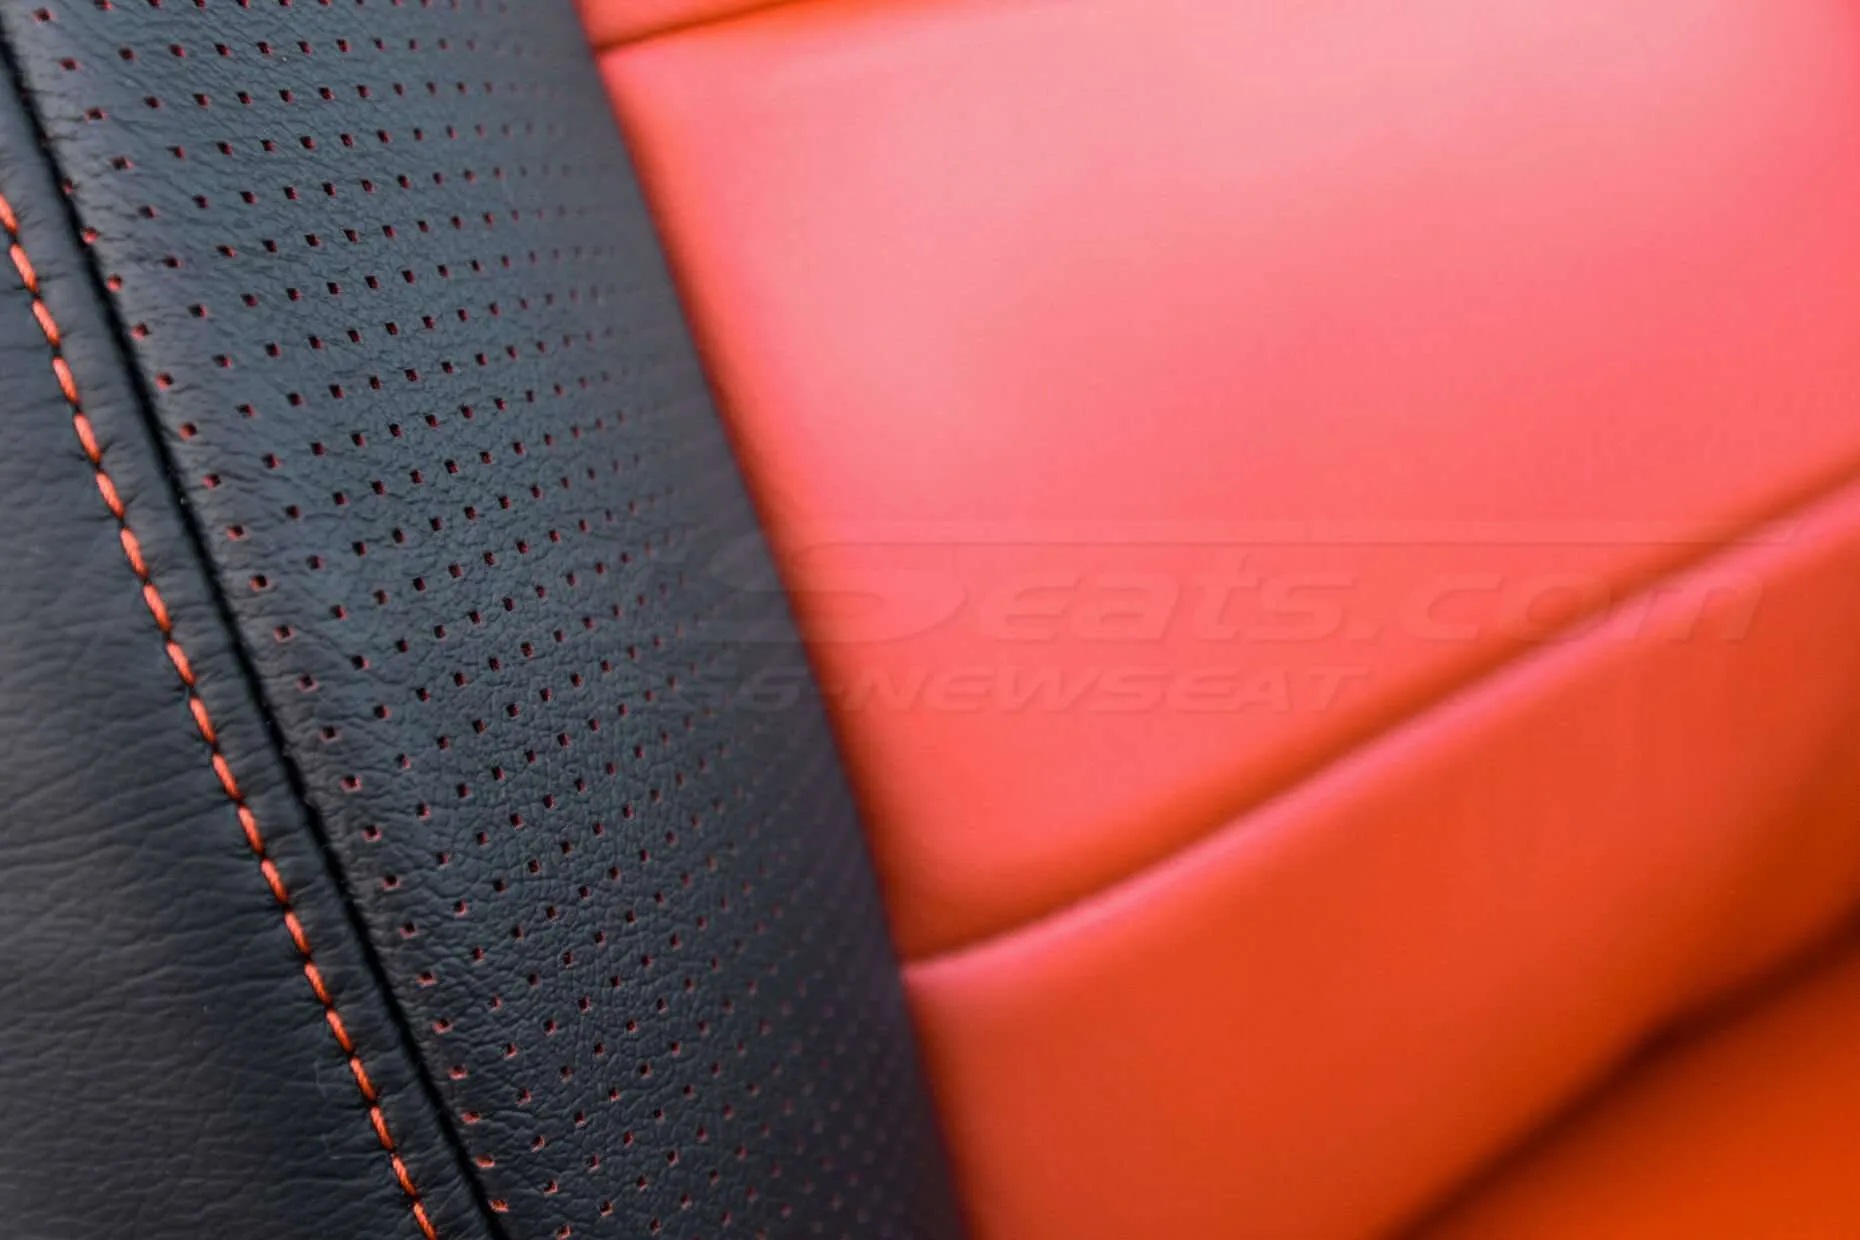 Toyota Tundra Leather Kit Installed - Black & Bright Red - Insert & perforated wing close-up